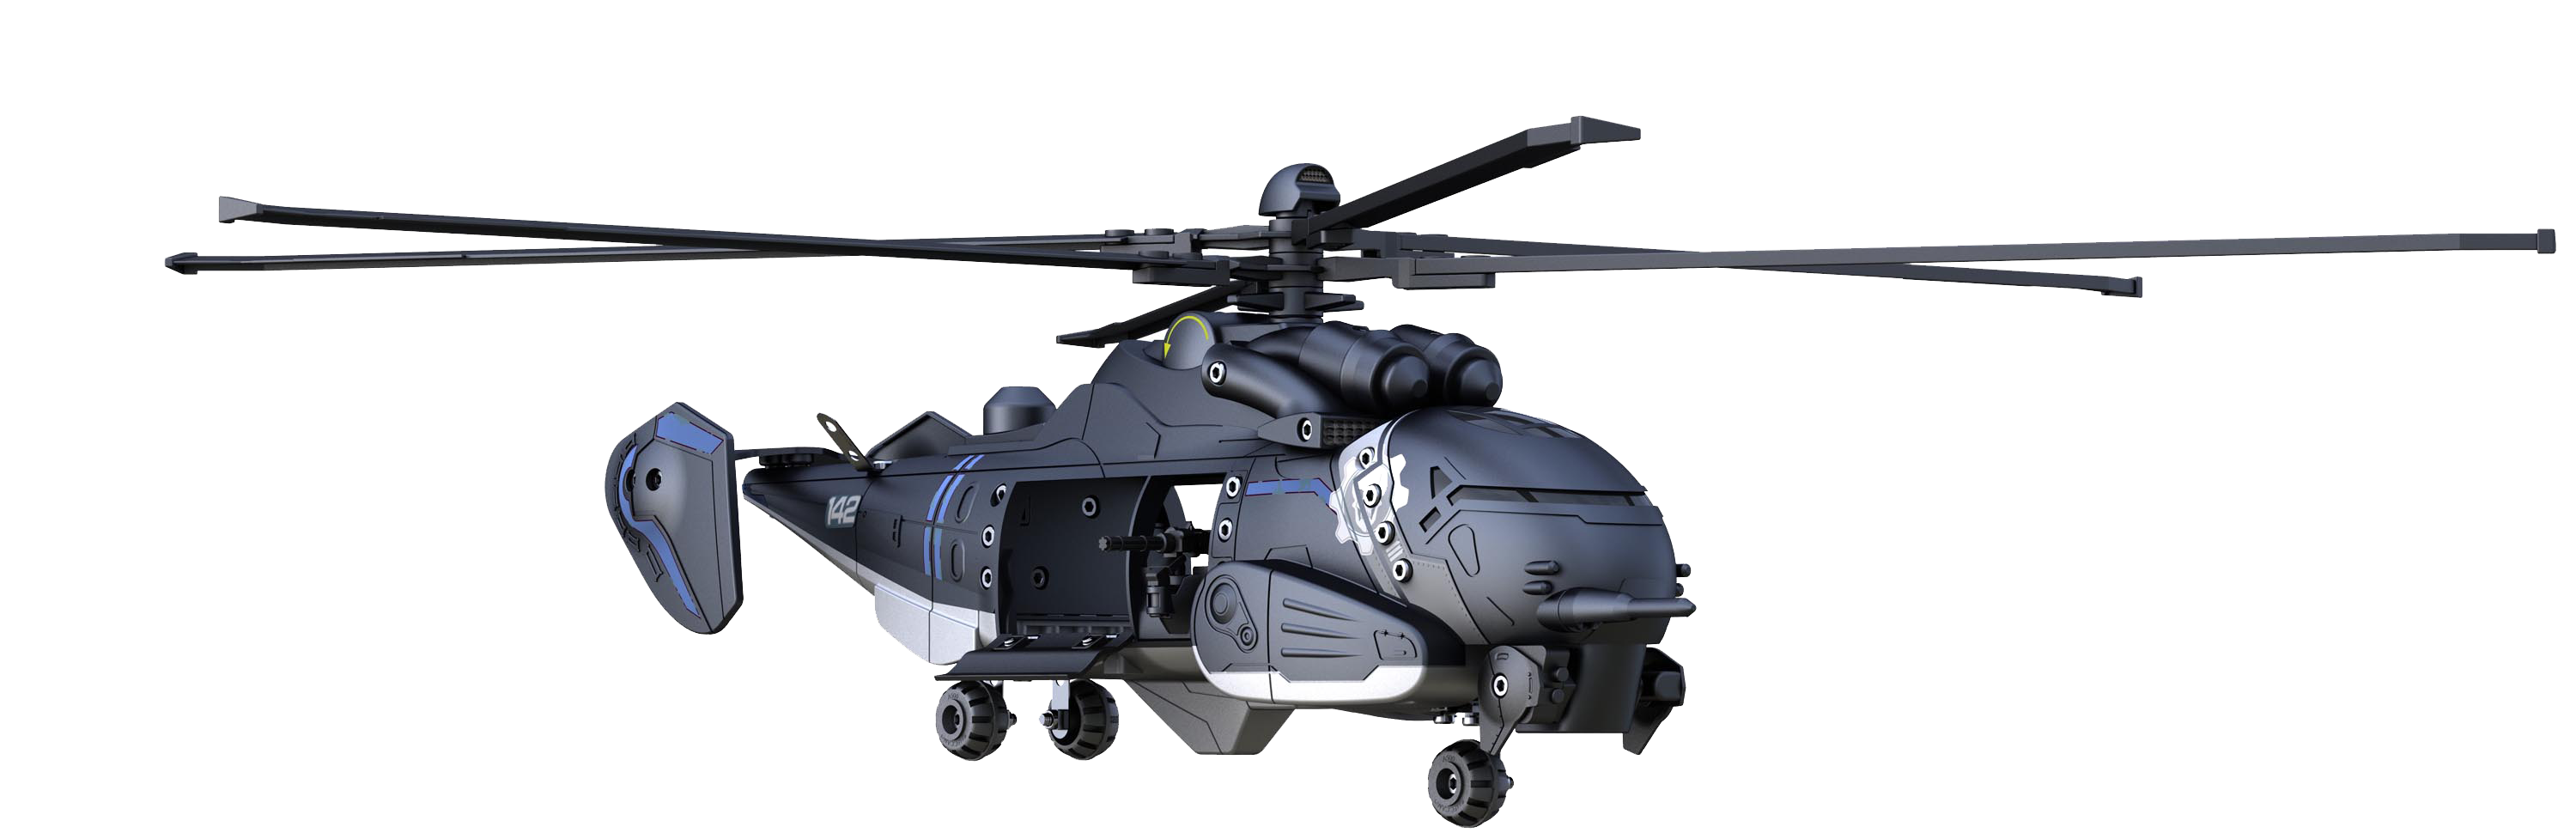 Army Helicopter Free PNG Image